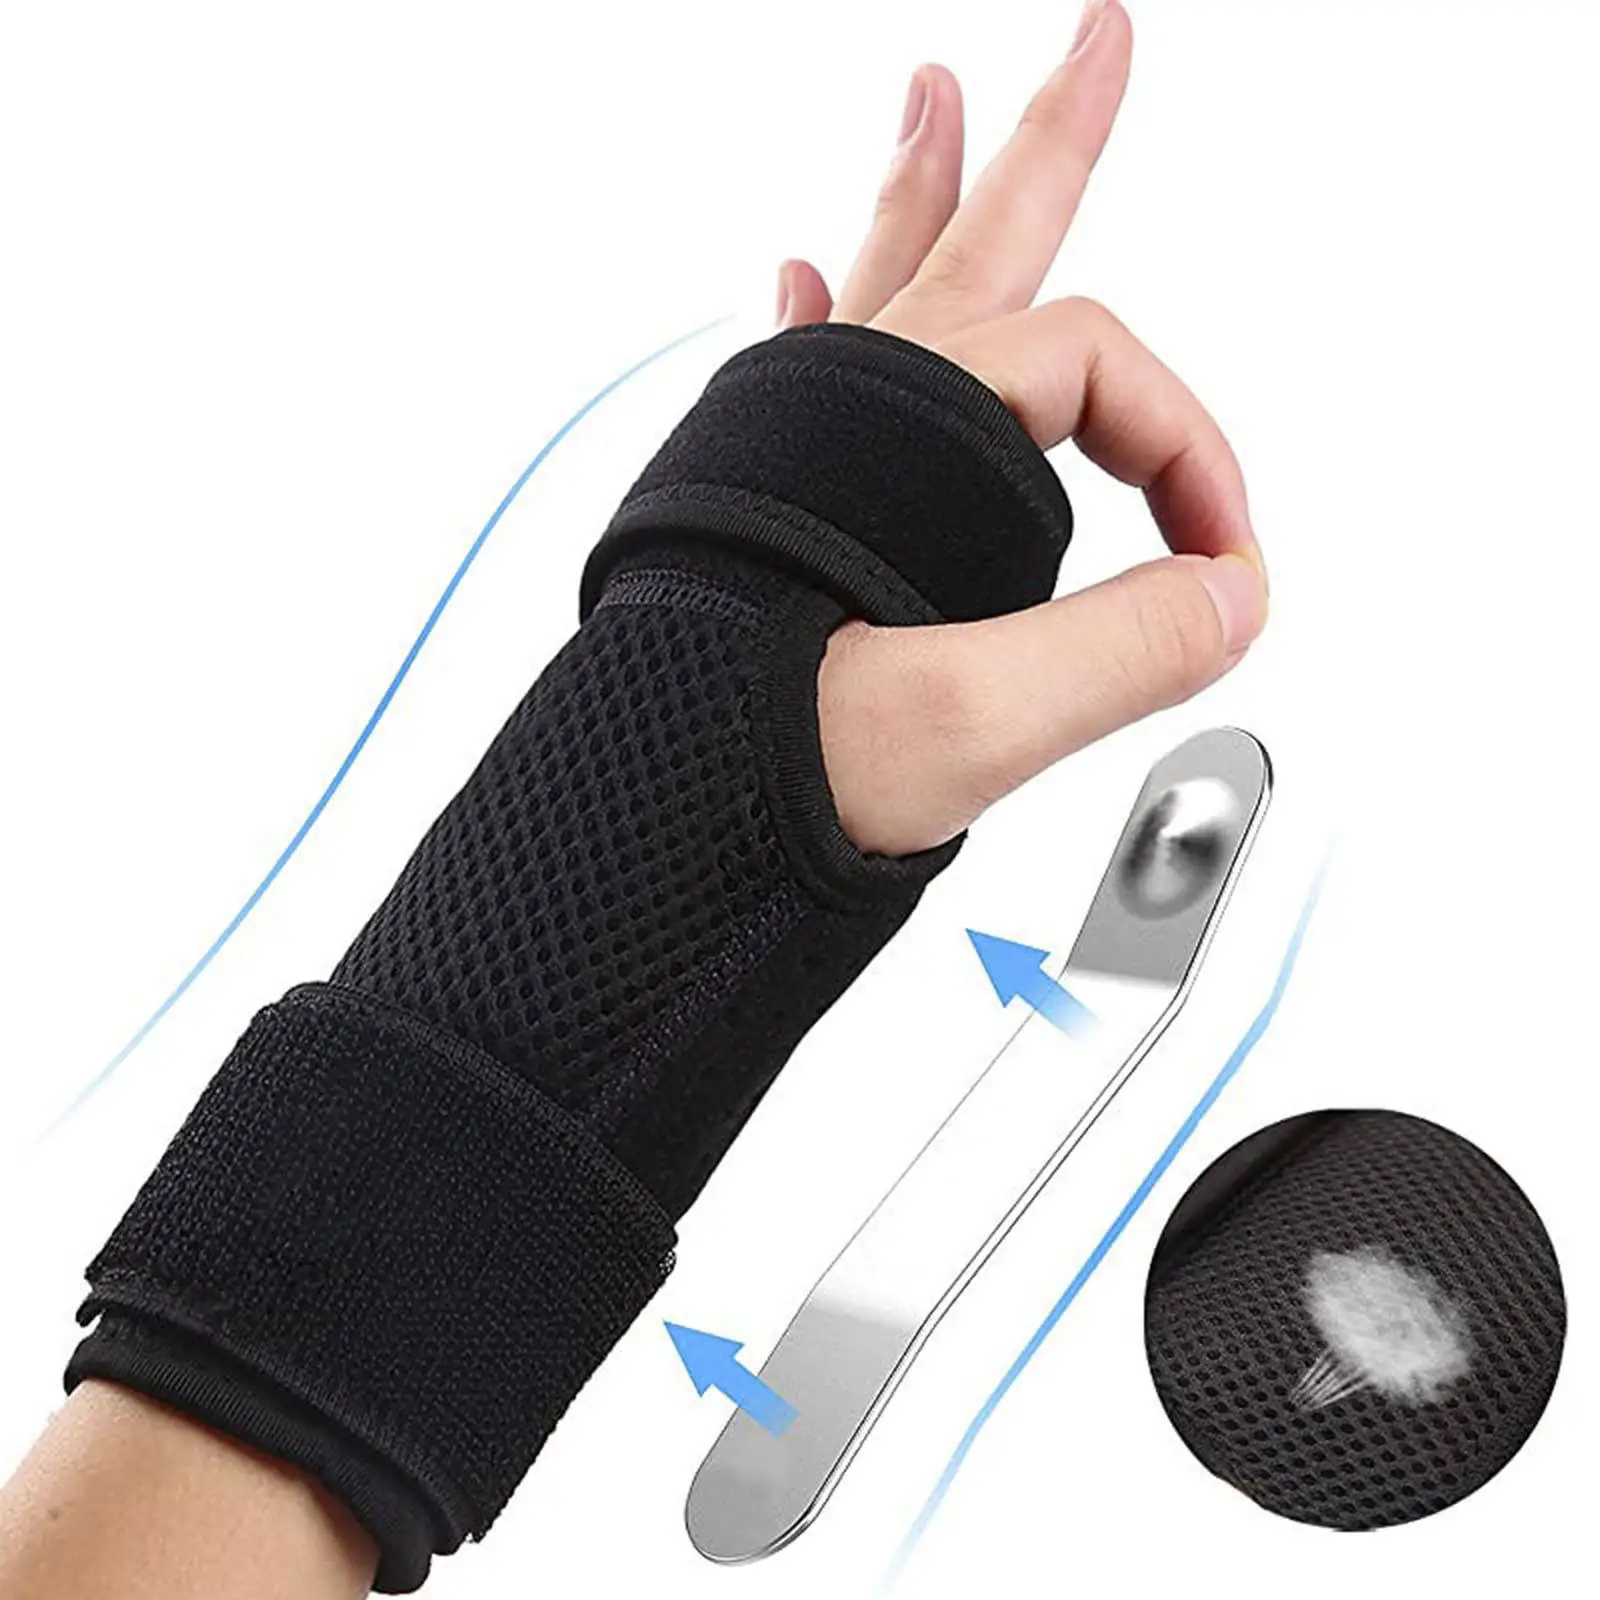 Wrist Brace Wrist Band Hand Protector Brace for Syndrome Protection Adult